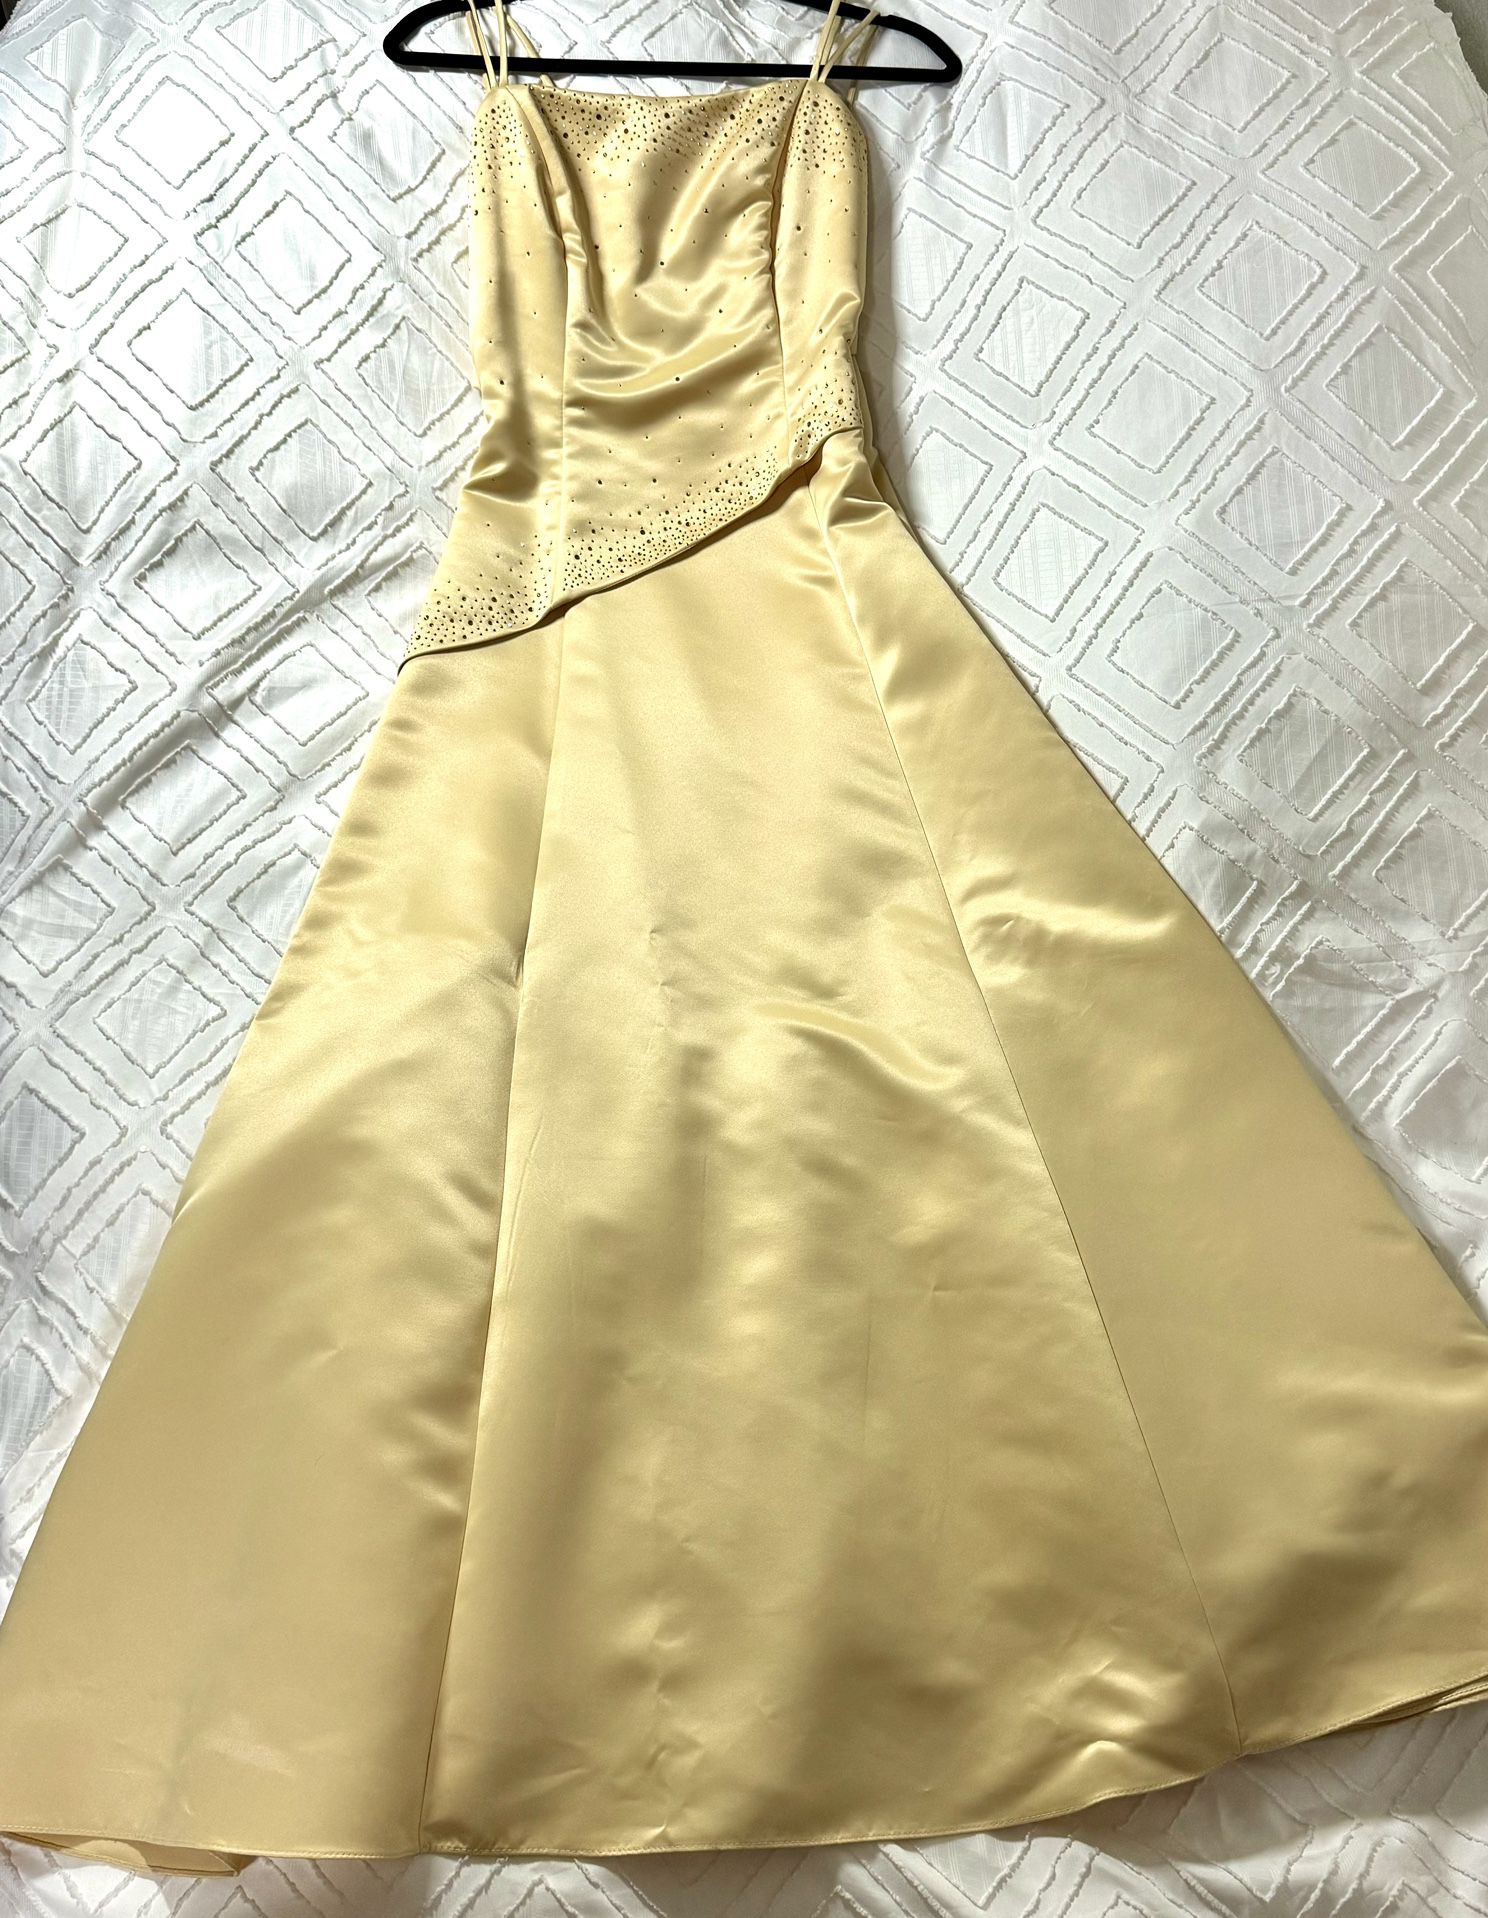 Gold Crystal Formal Evening Gown Prom Dress